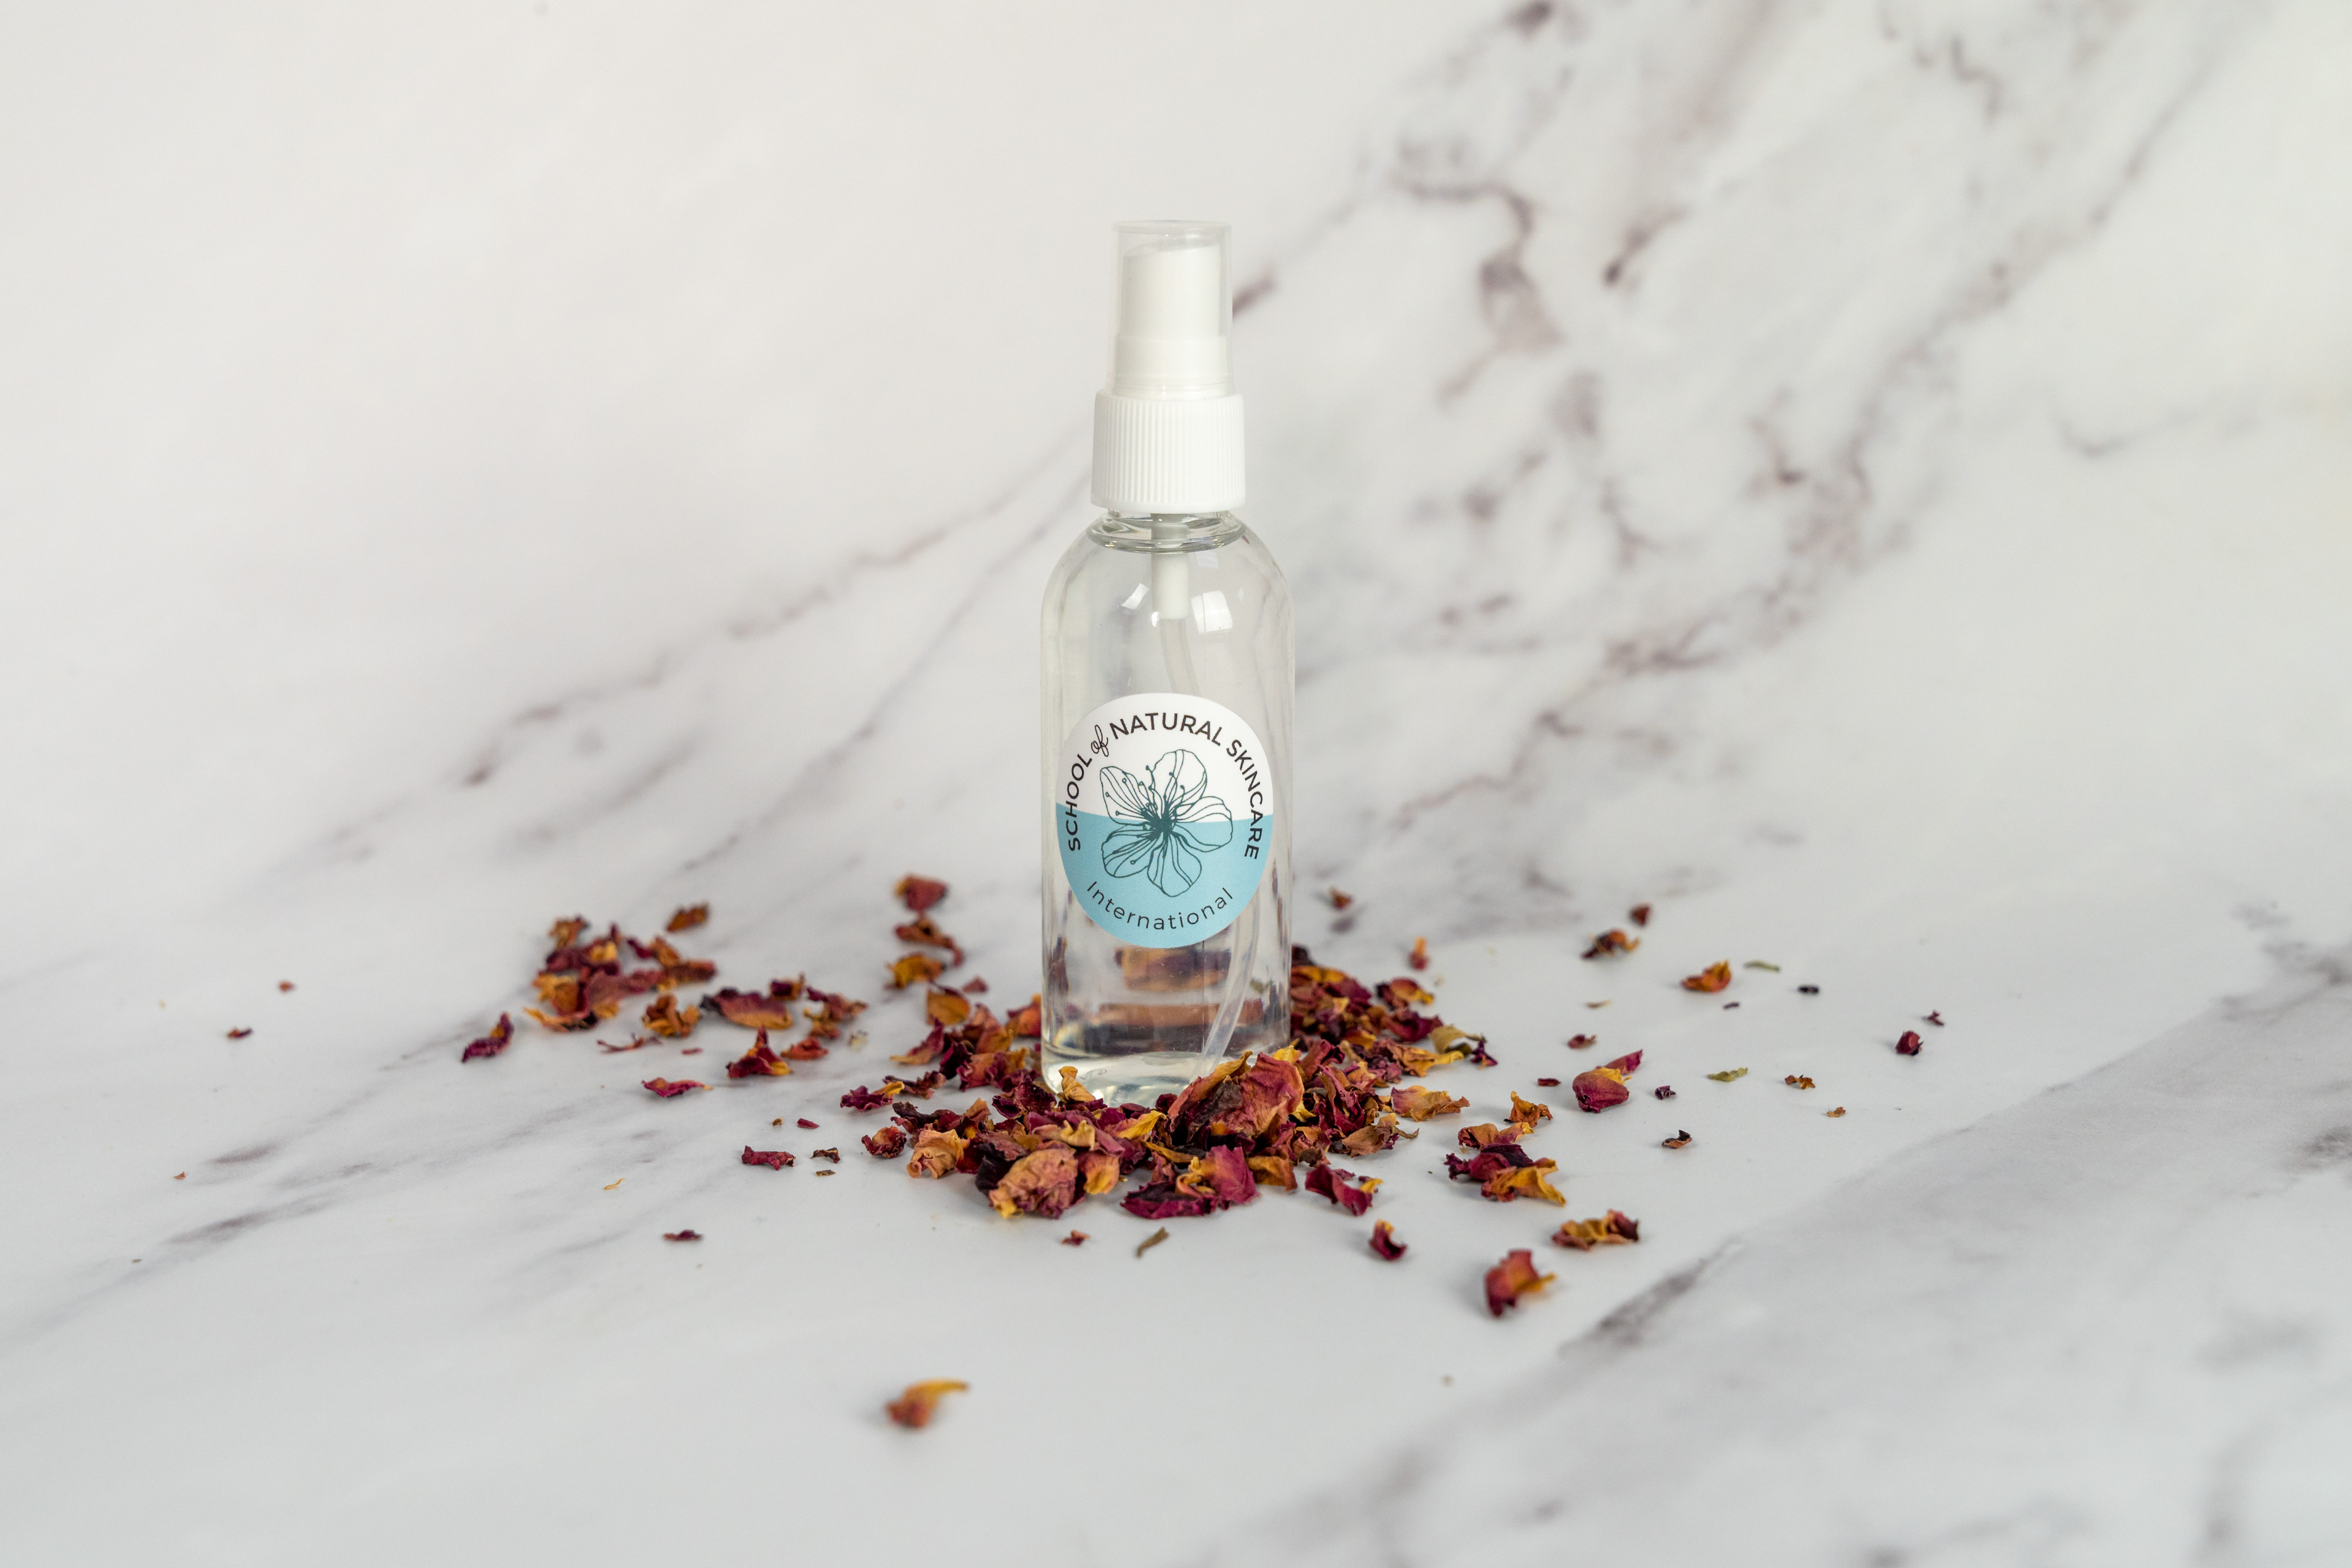 Natural Hand Sanitizers; the Best Antibacterial Hand Care Skincare Formulation 